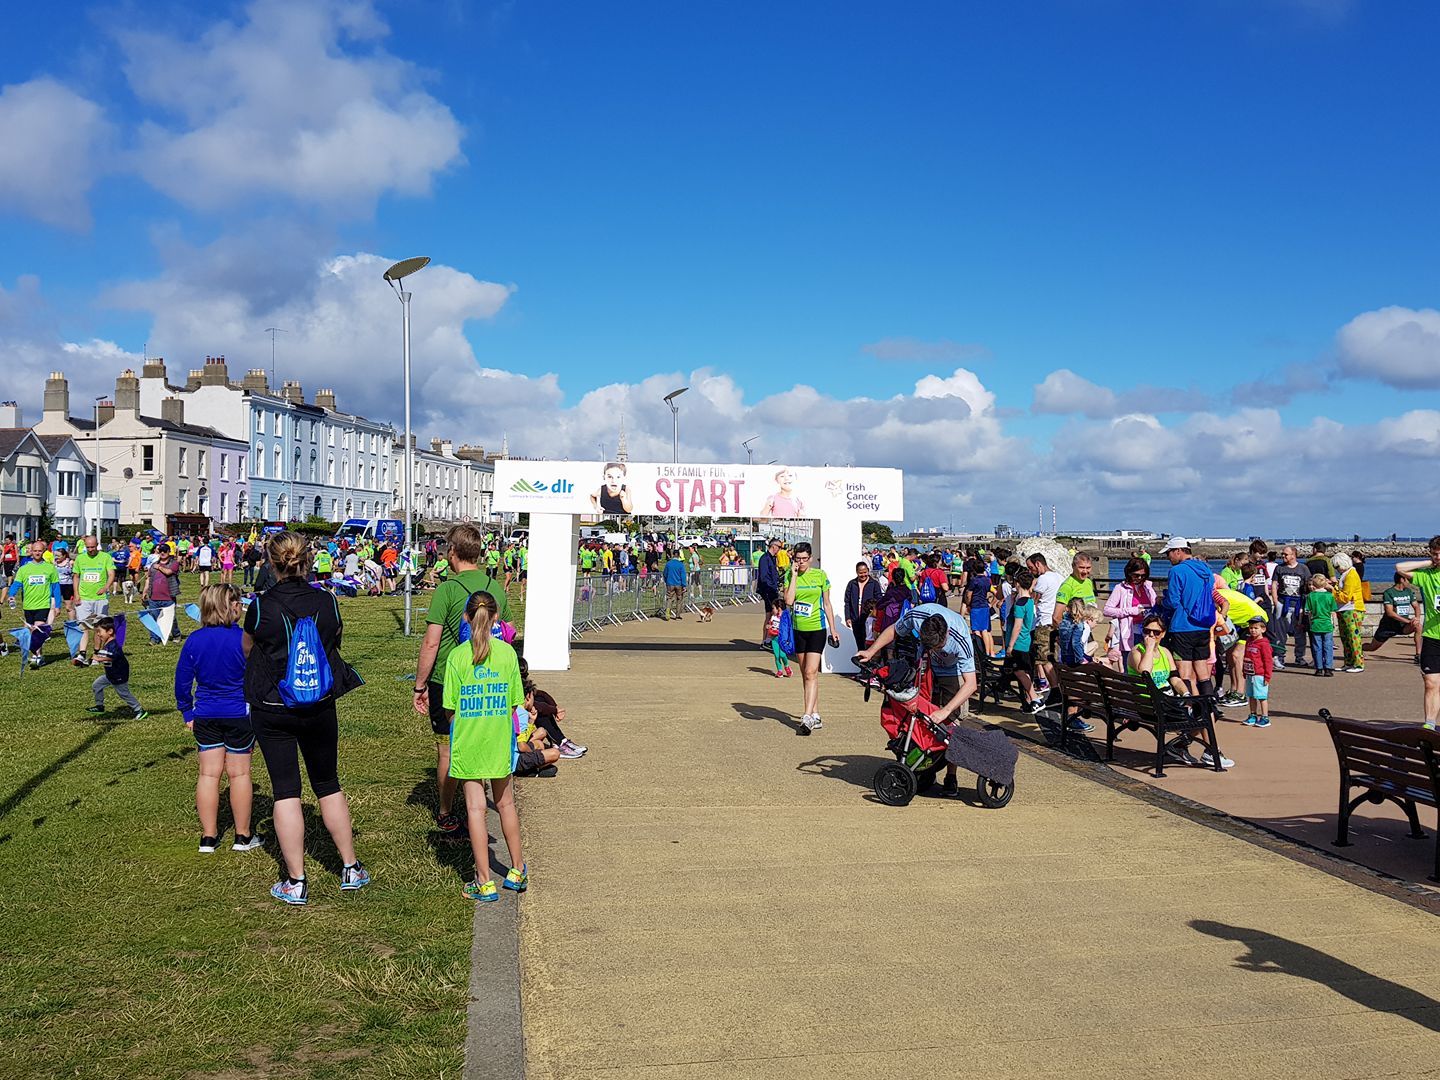 Transpoco's GPS vehicle tracking at the Dlr Bay 10k Dún Laoghaire run